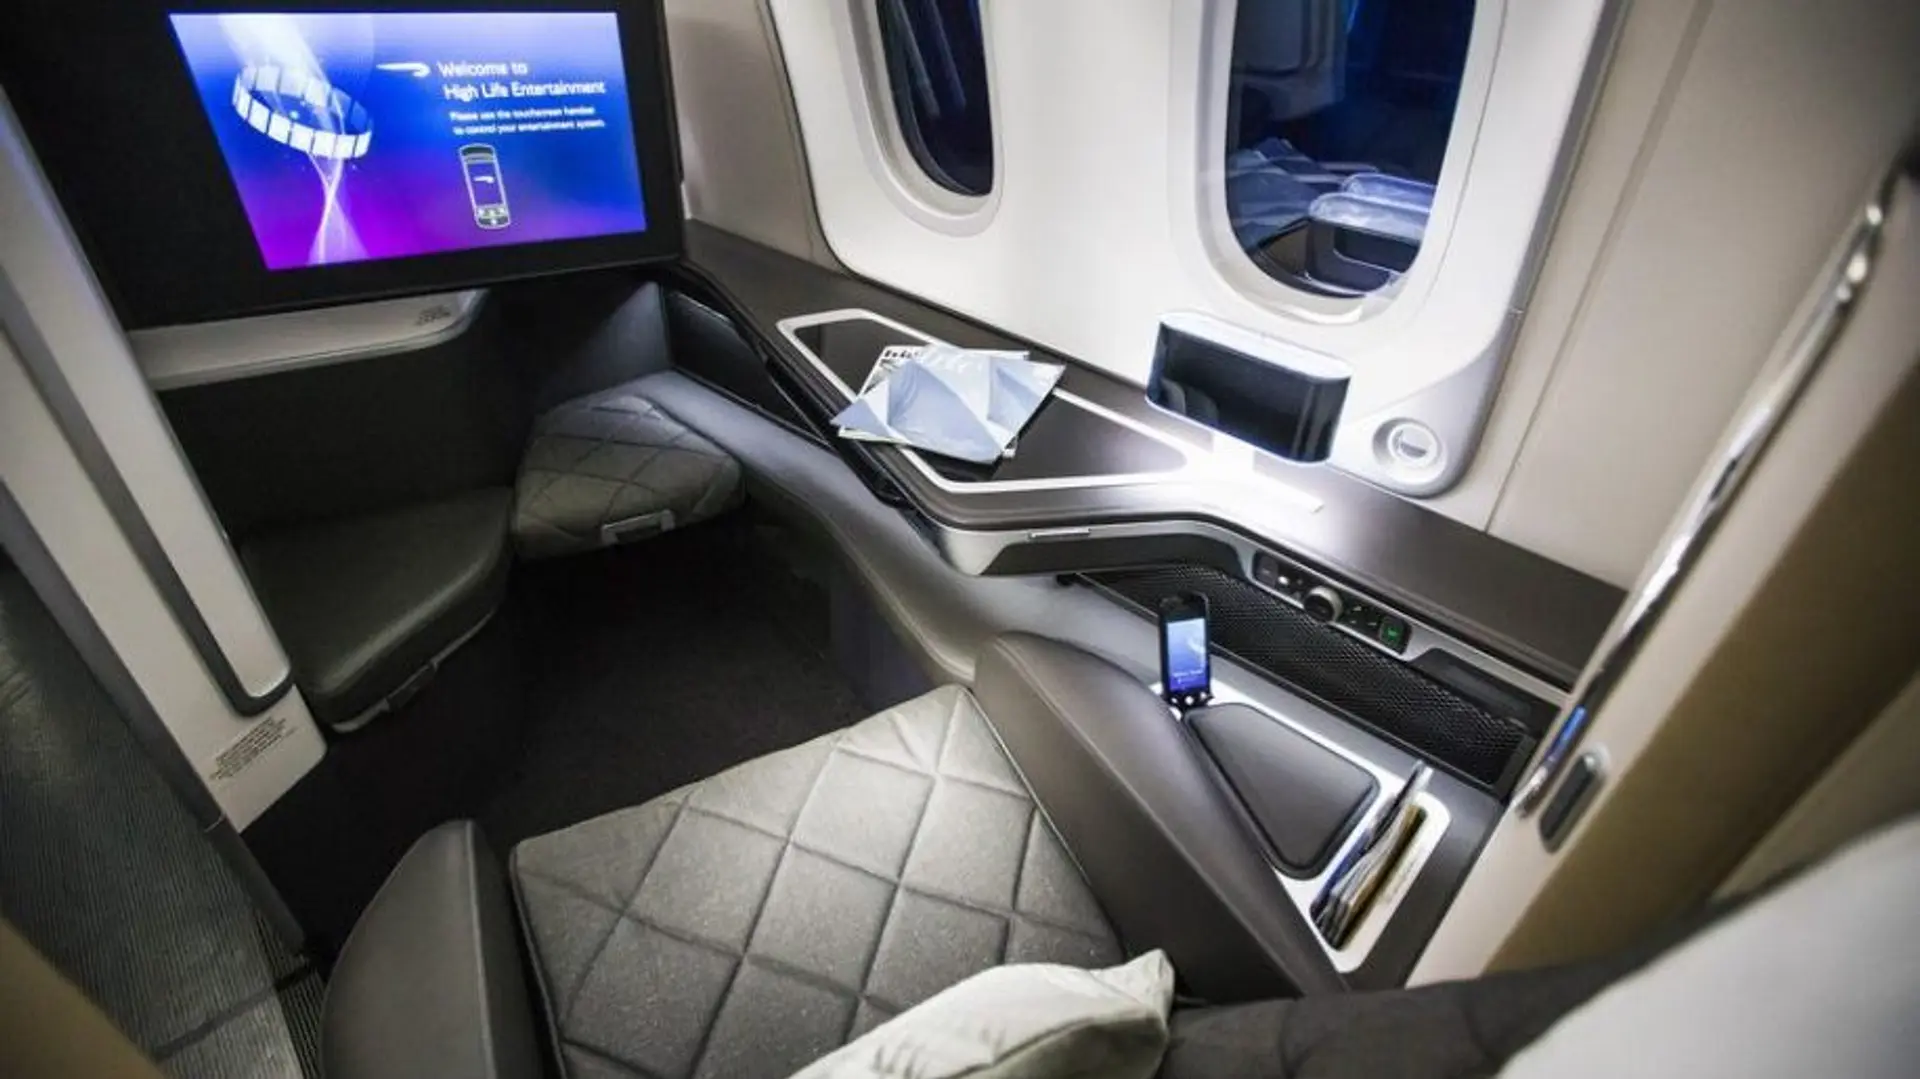 Airlines Articles - British Airways new First Class - now featuring doors